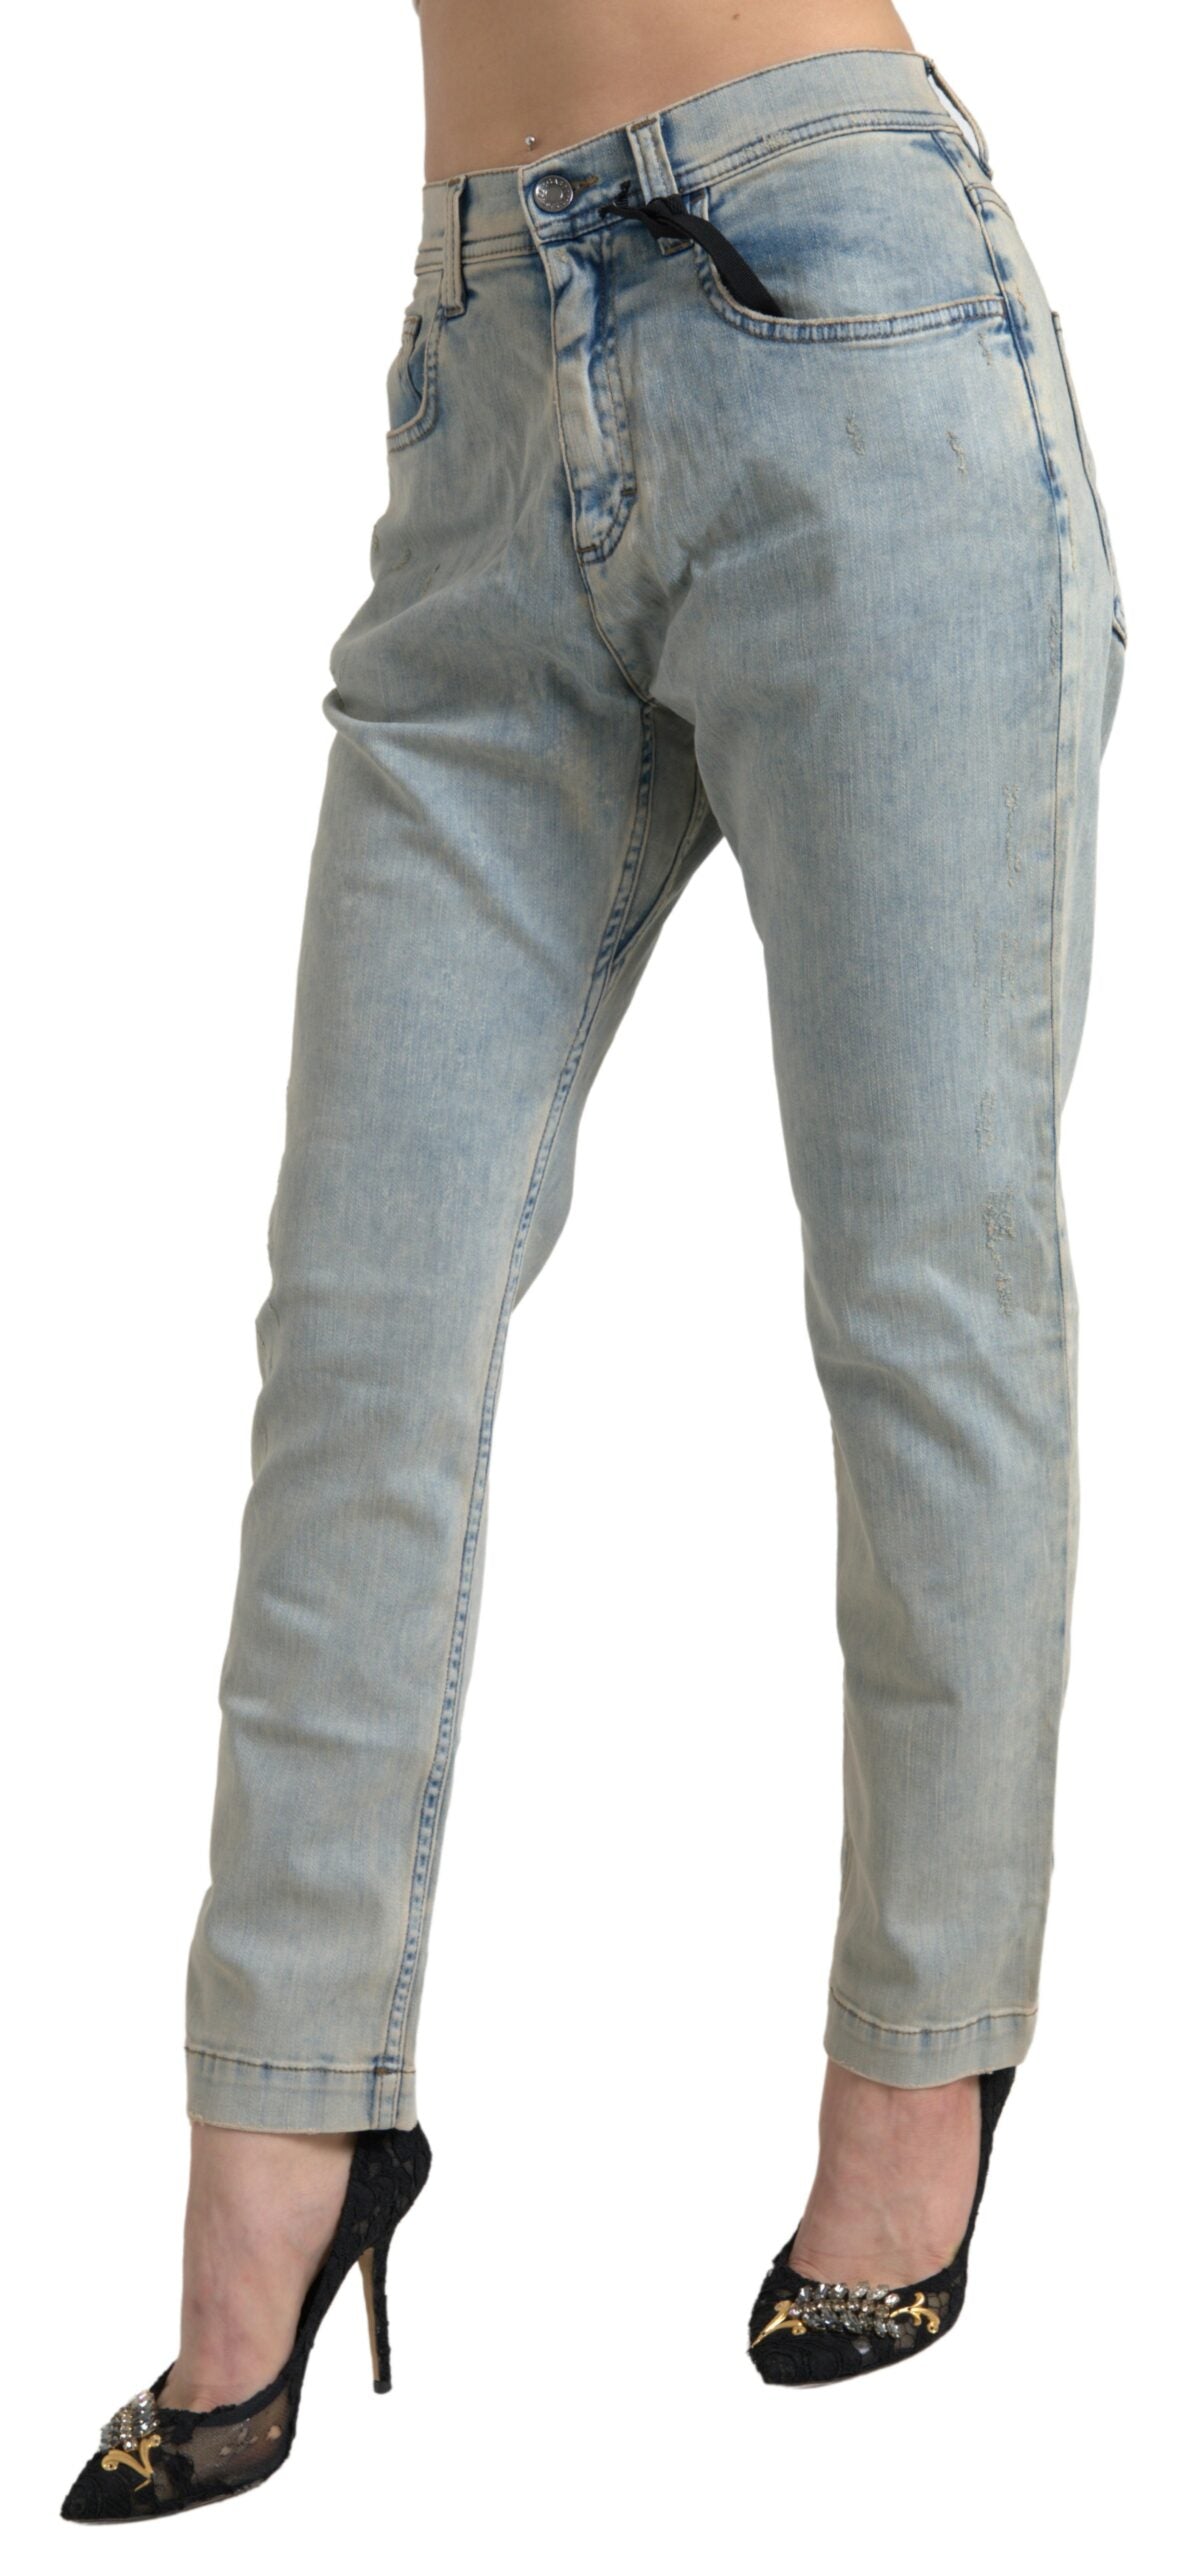 Dolce & Gabbana Chic Mid Waist Skinny Jeans in Blue